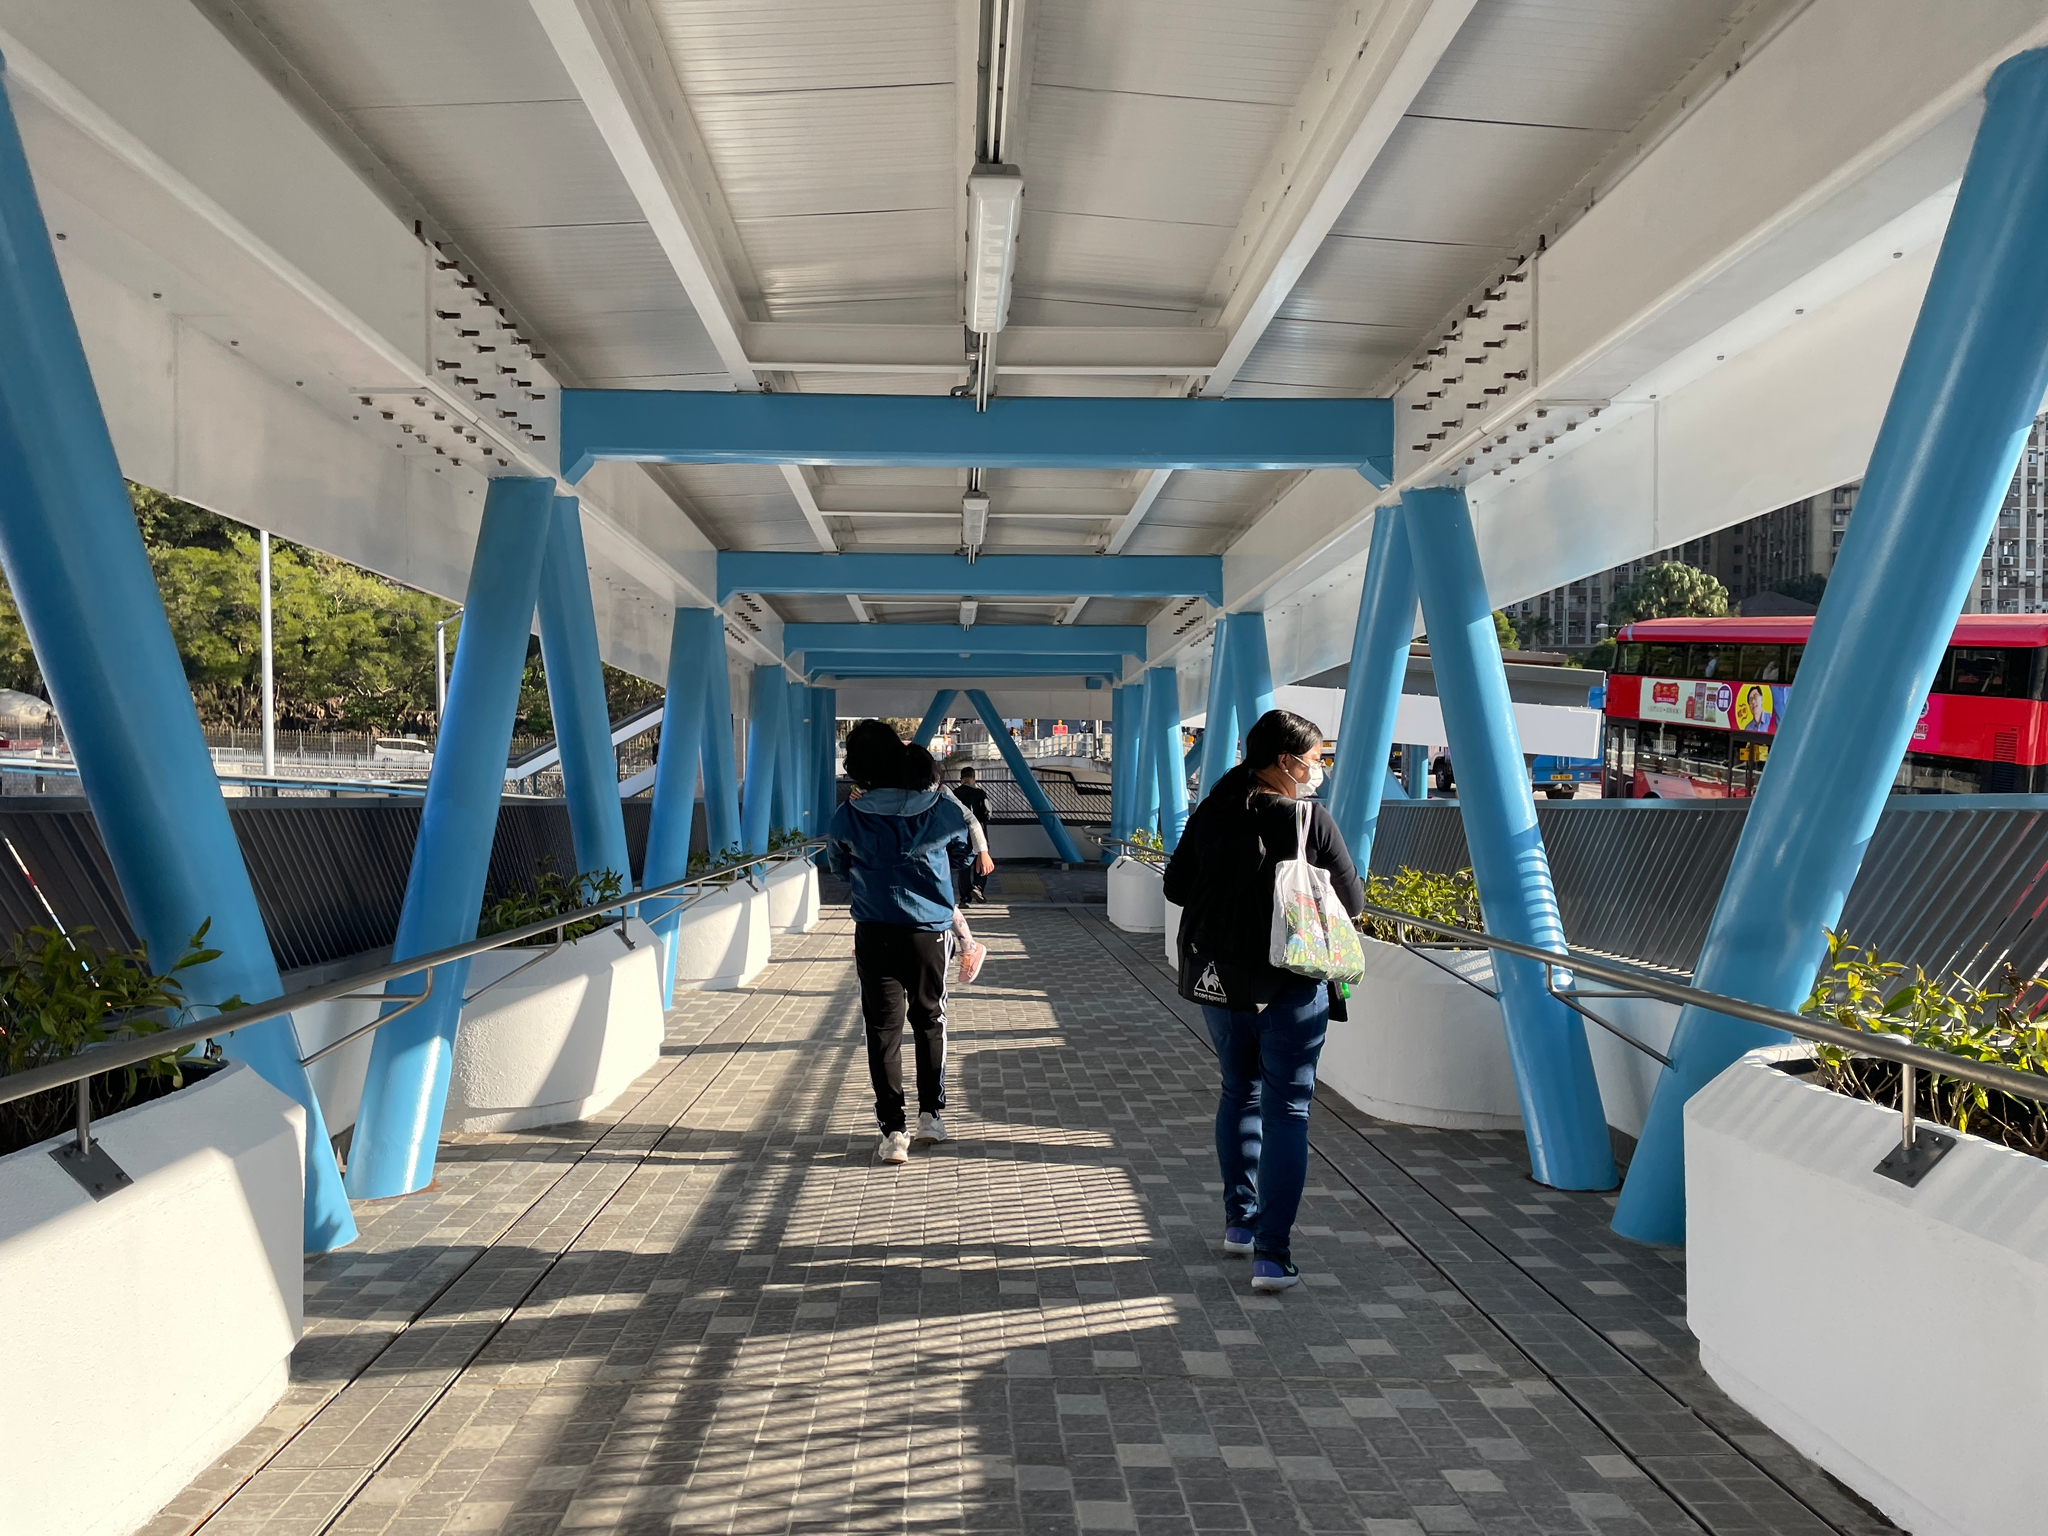 Pedestrian Connectivity Facility located at the Tseung Kwan O Tunnel Bus-Bus Interchange (Tseung Kwan O Bound) was opened for public use.